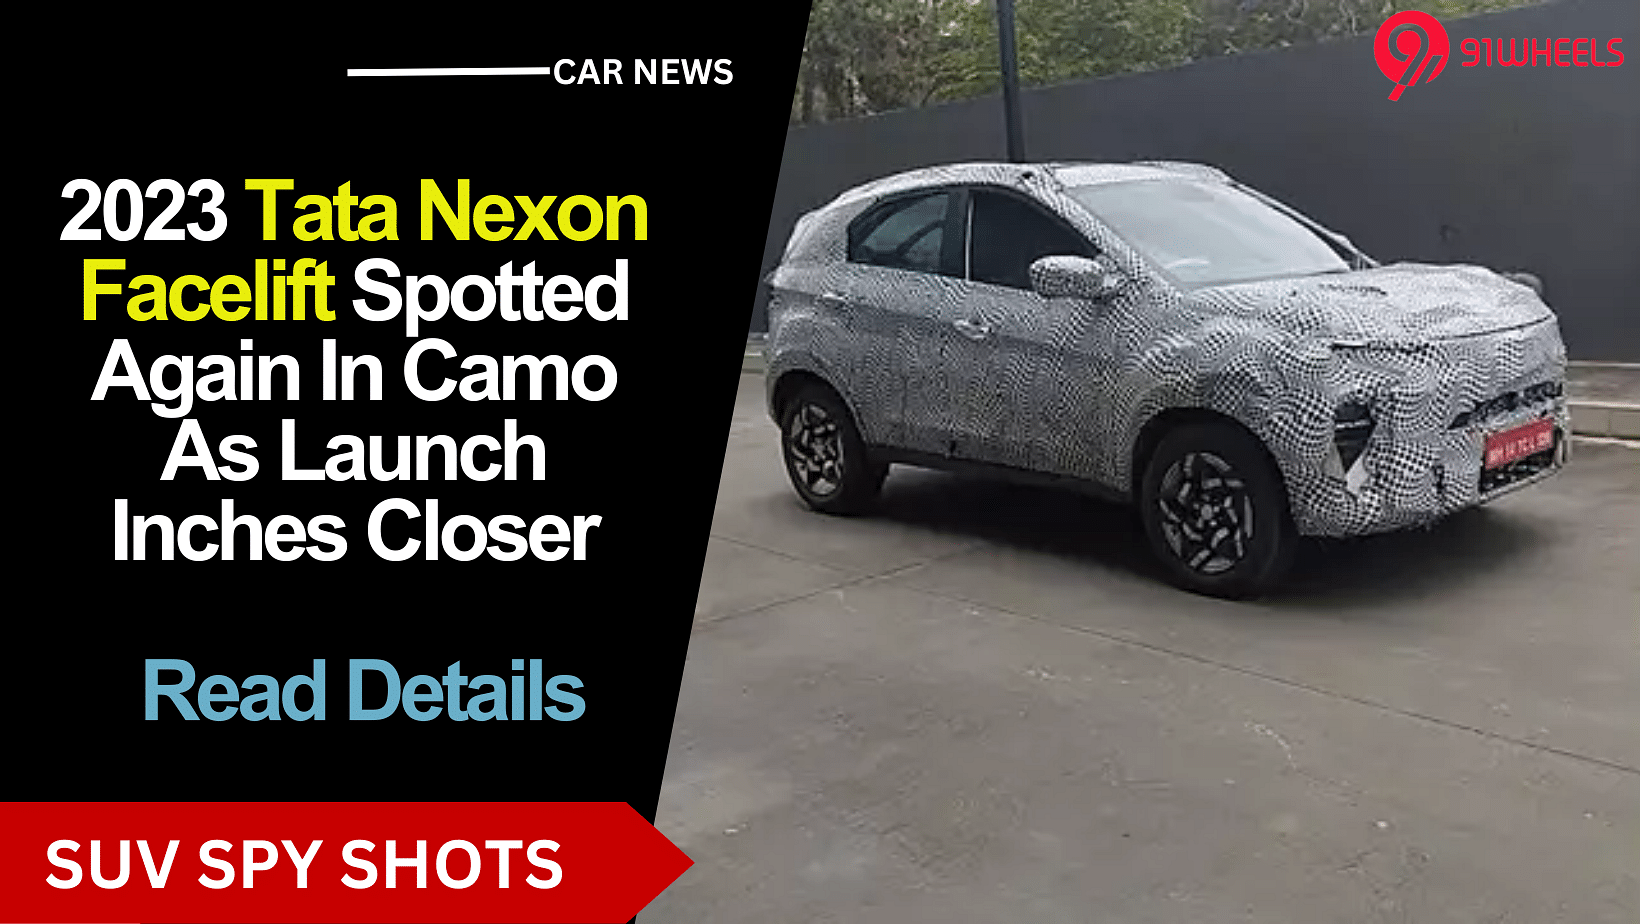 2023 Tata Nexon Facelift Spotted Again In Camo As Launch Inches Closer